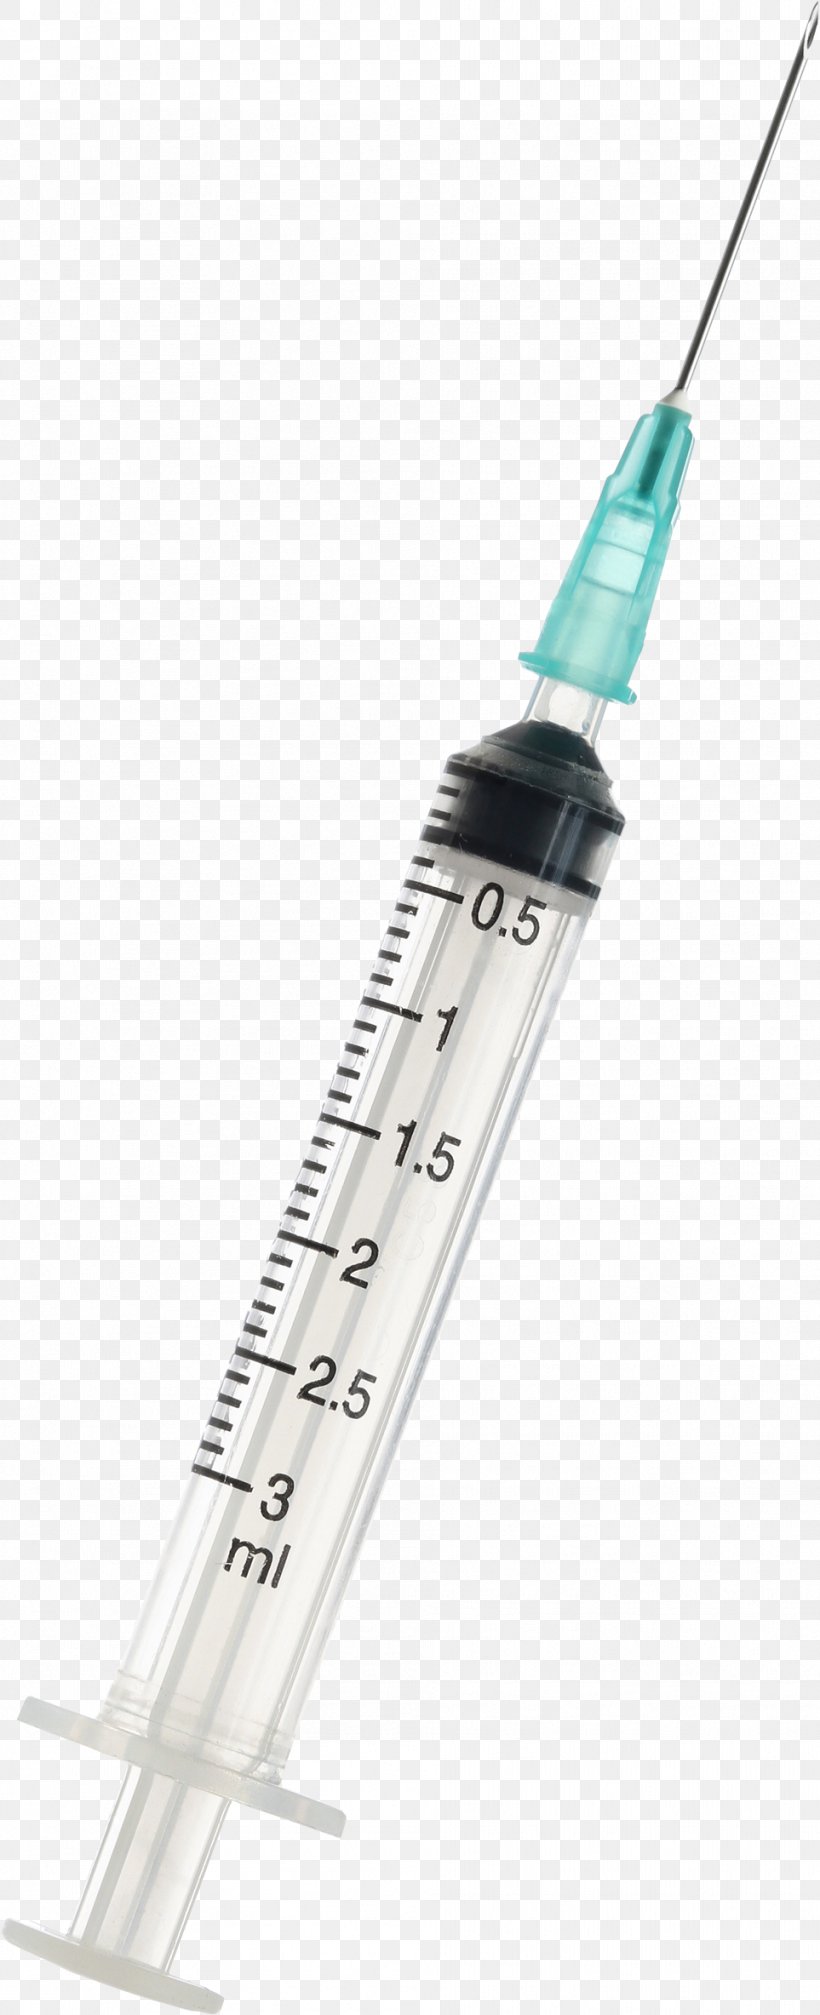 Syringe Hypodermic Needle Injection Clip Art, PNG, 963x2367px, Syringe, Drug, Drug Injection, Hypodermic Needle, Injection Download Free